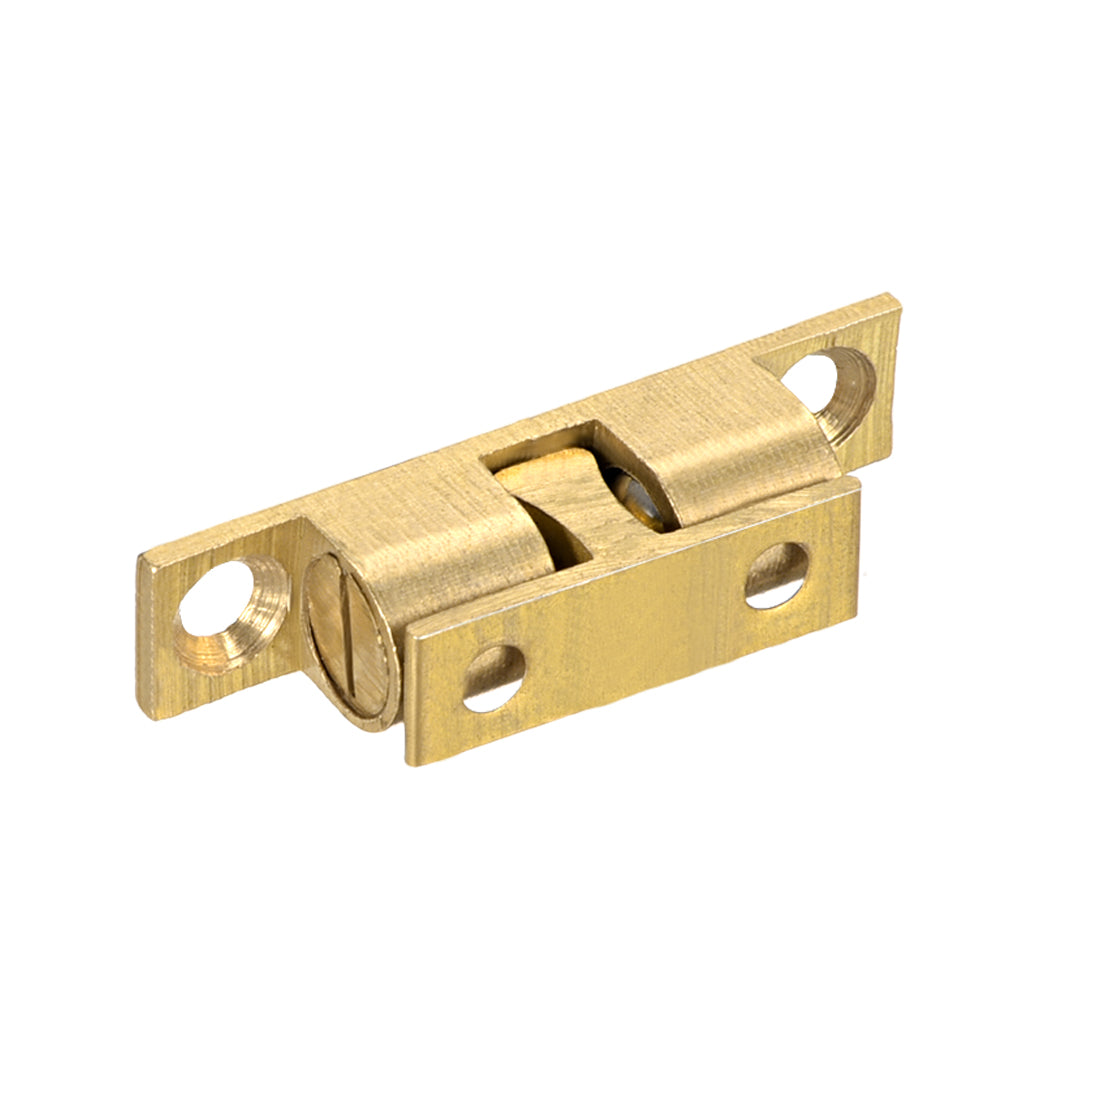 uxcell Uxcell Cabinet Door Closet Brass Double Ball Catch Tension Latch 35mm Length Gold Tone